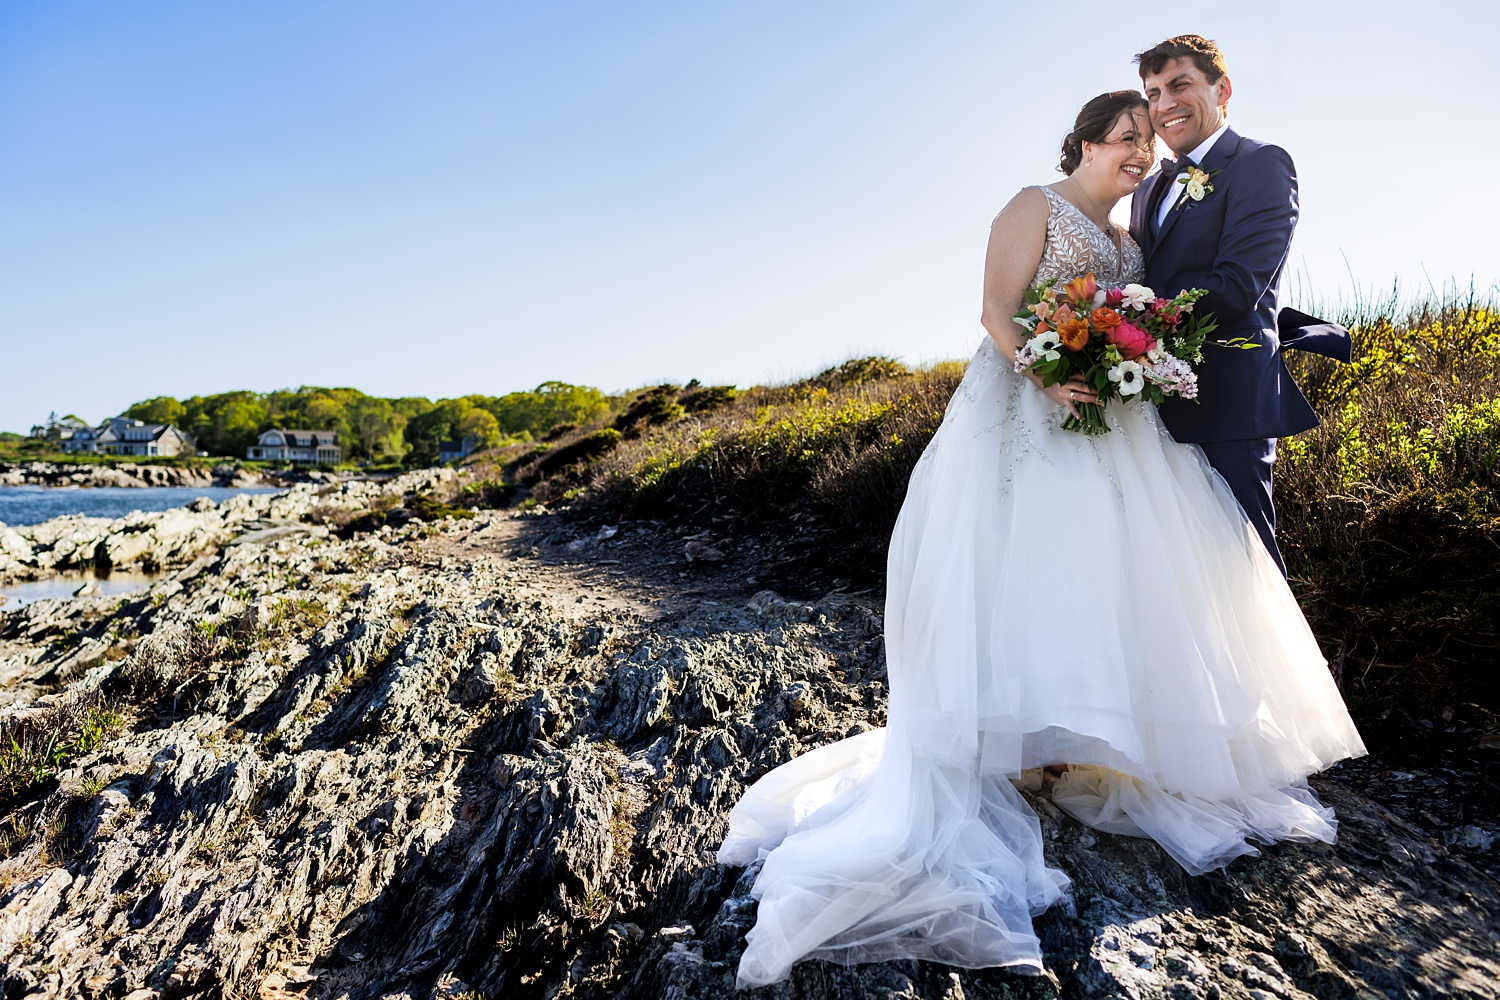 After their Cape Elizabeth Maine ceremony, the newlyweds smile out on the cliffs at Trundy Point